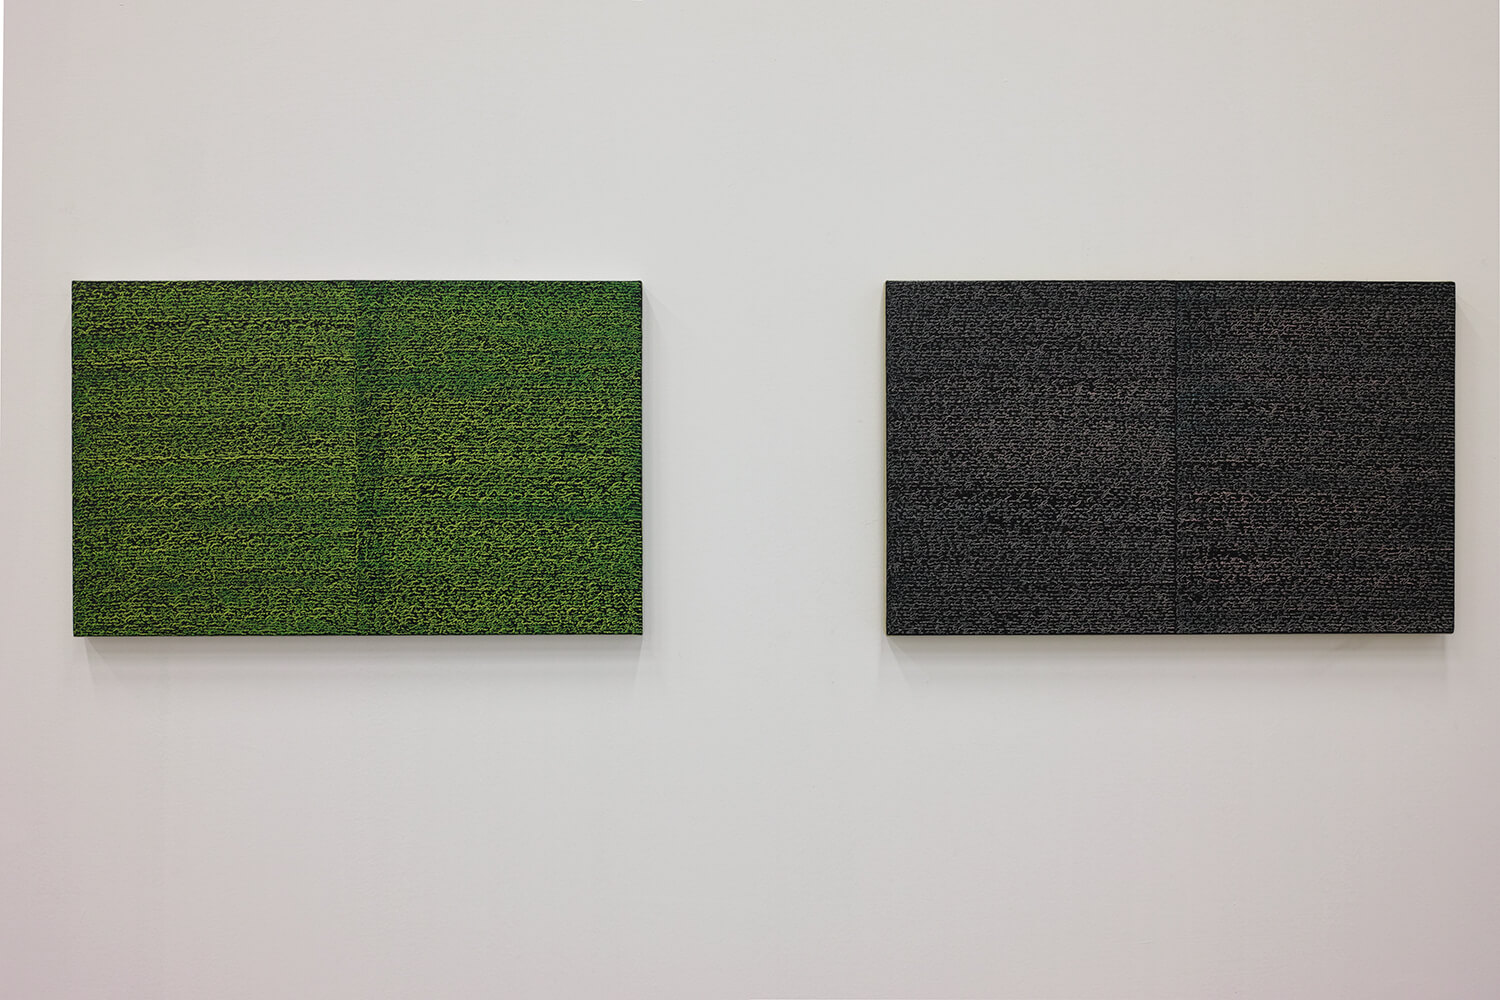 'Open Book yellow-green'  (left) & 'Open Book pink-indigo' (right)<br>Oil and Amber on canvas over panel, 37 x 60 cm, 2008 each